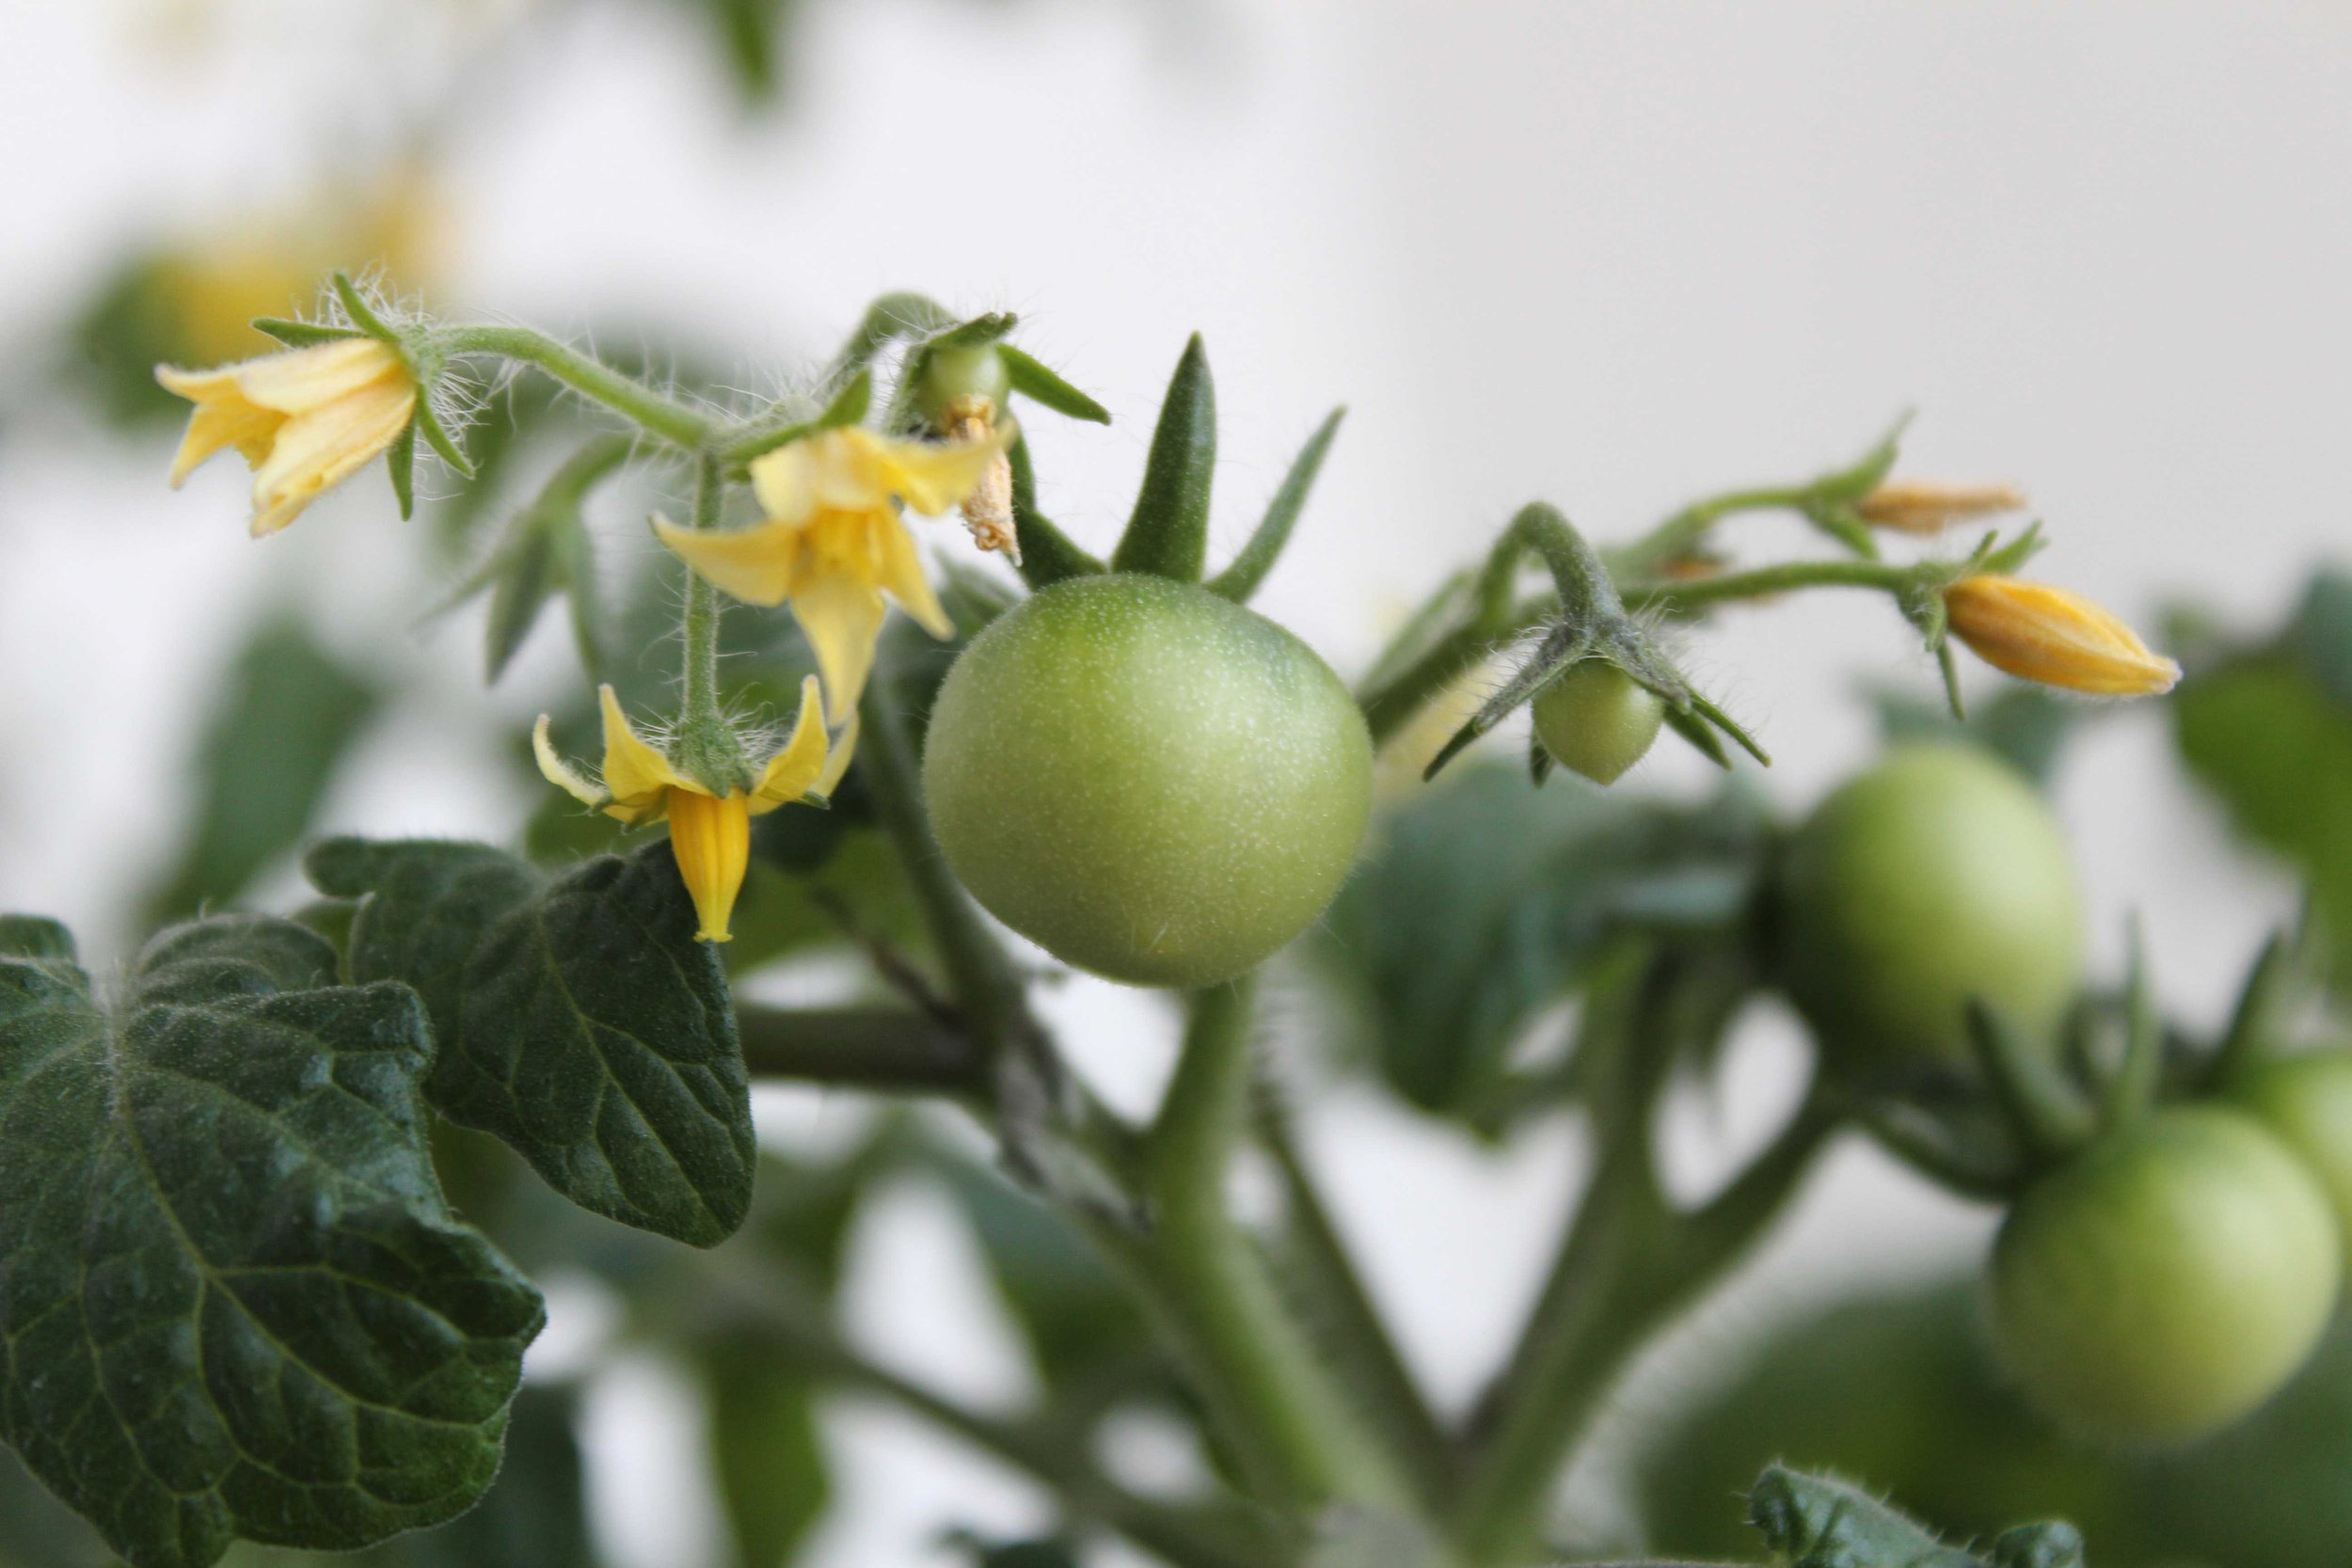 A tomato plant with young green tomatoes and flowers